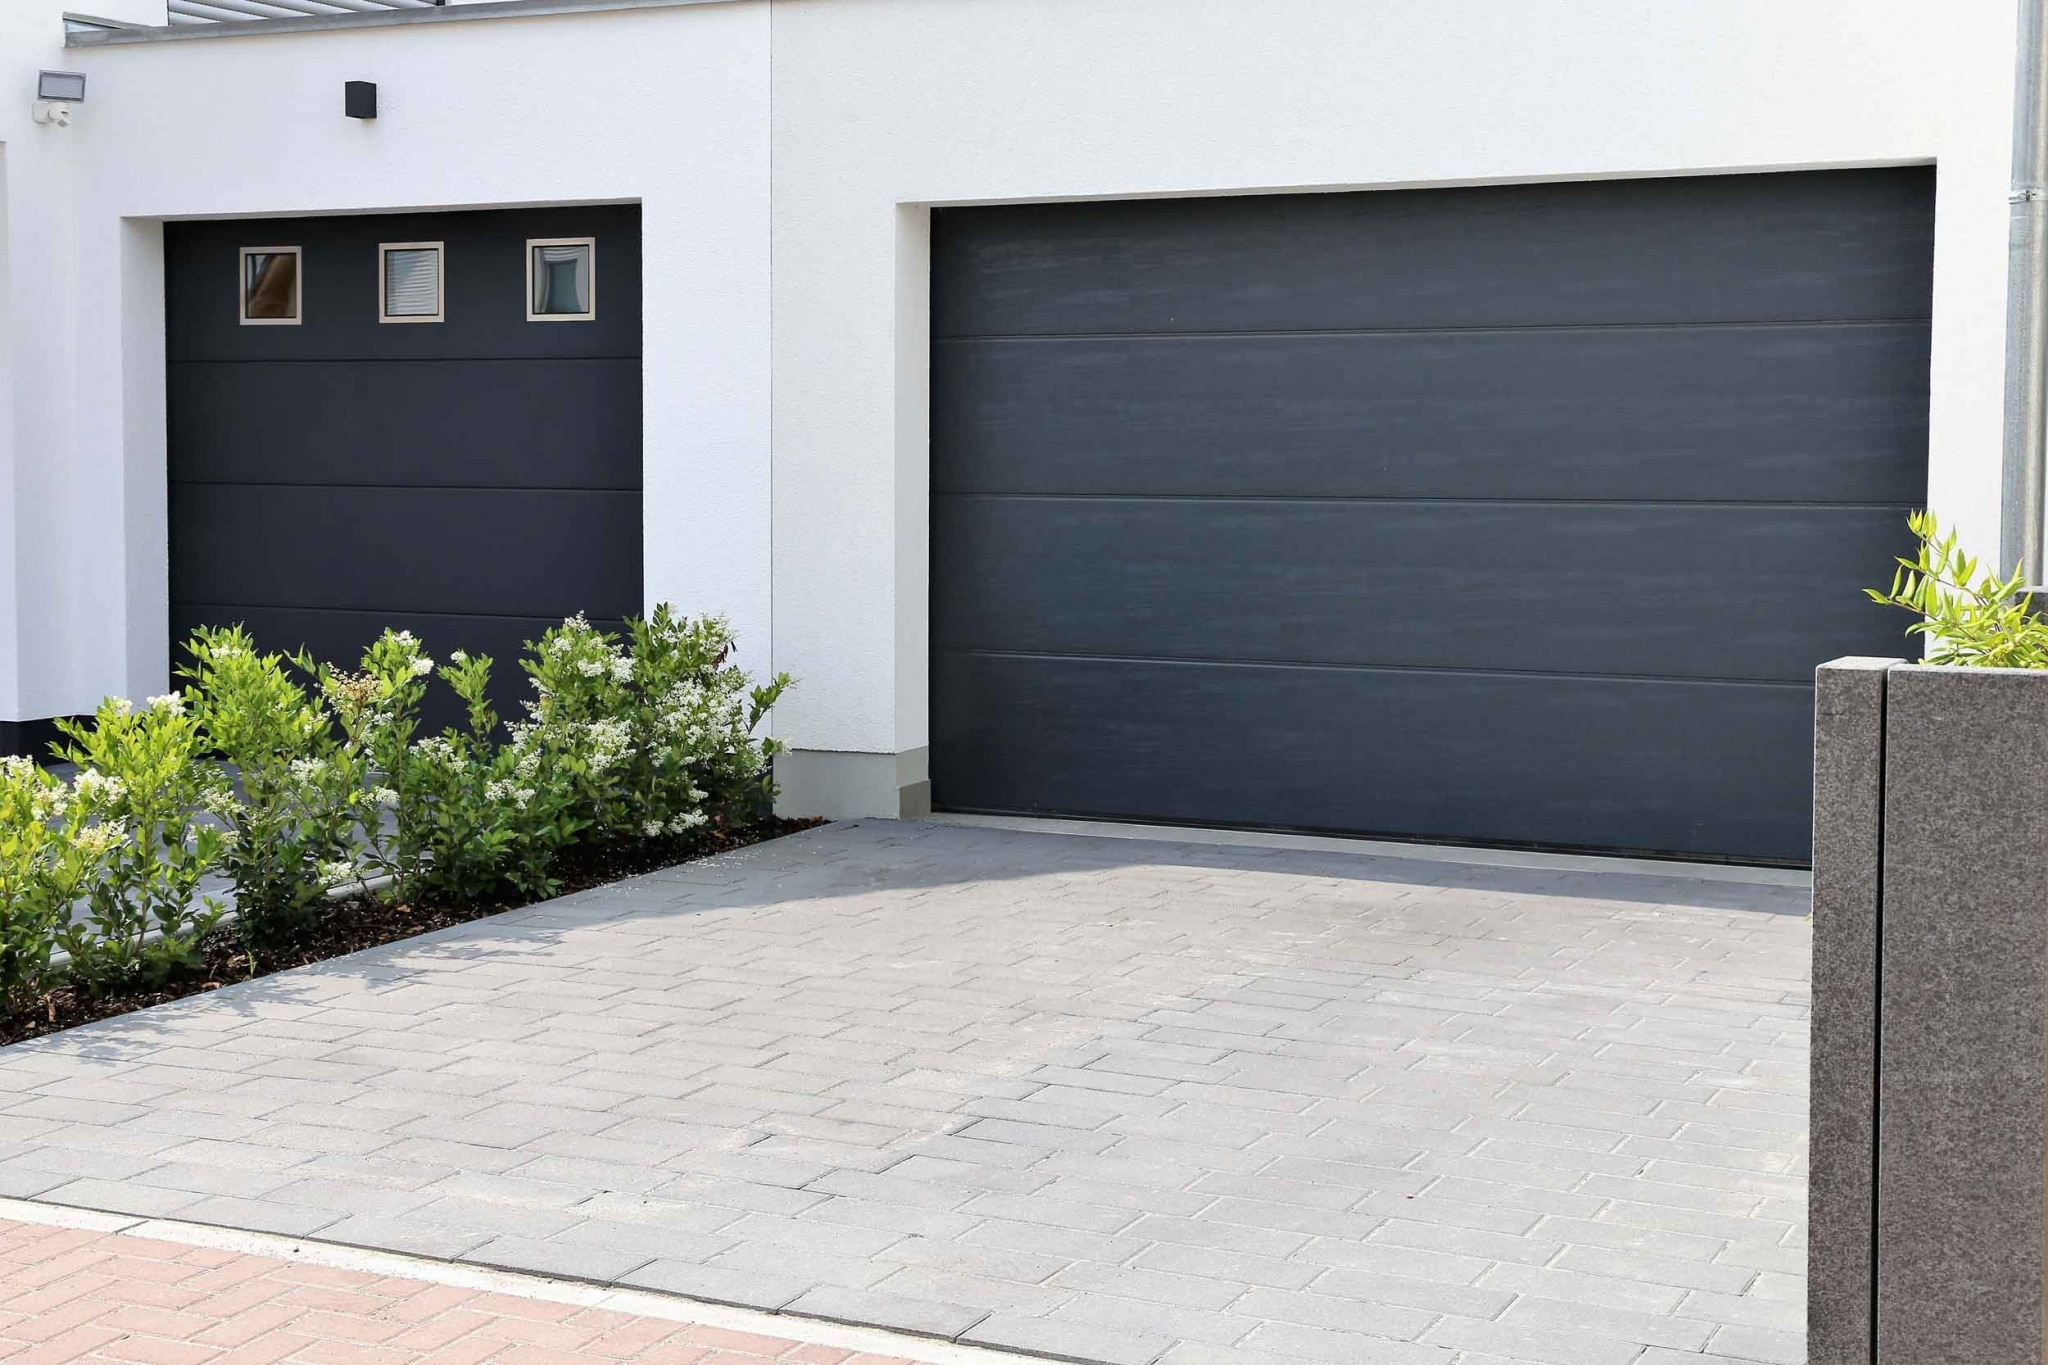 4 Tips To Help Keep Your Garage Pest-Free All Year Round